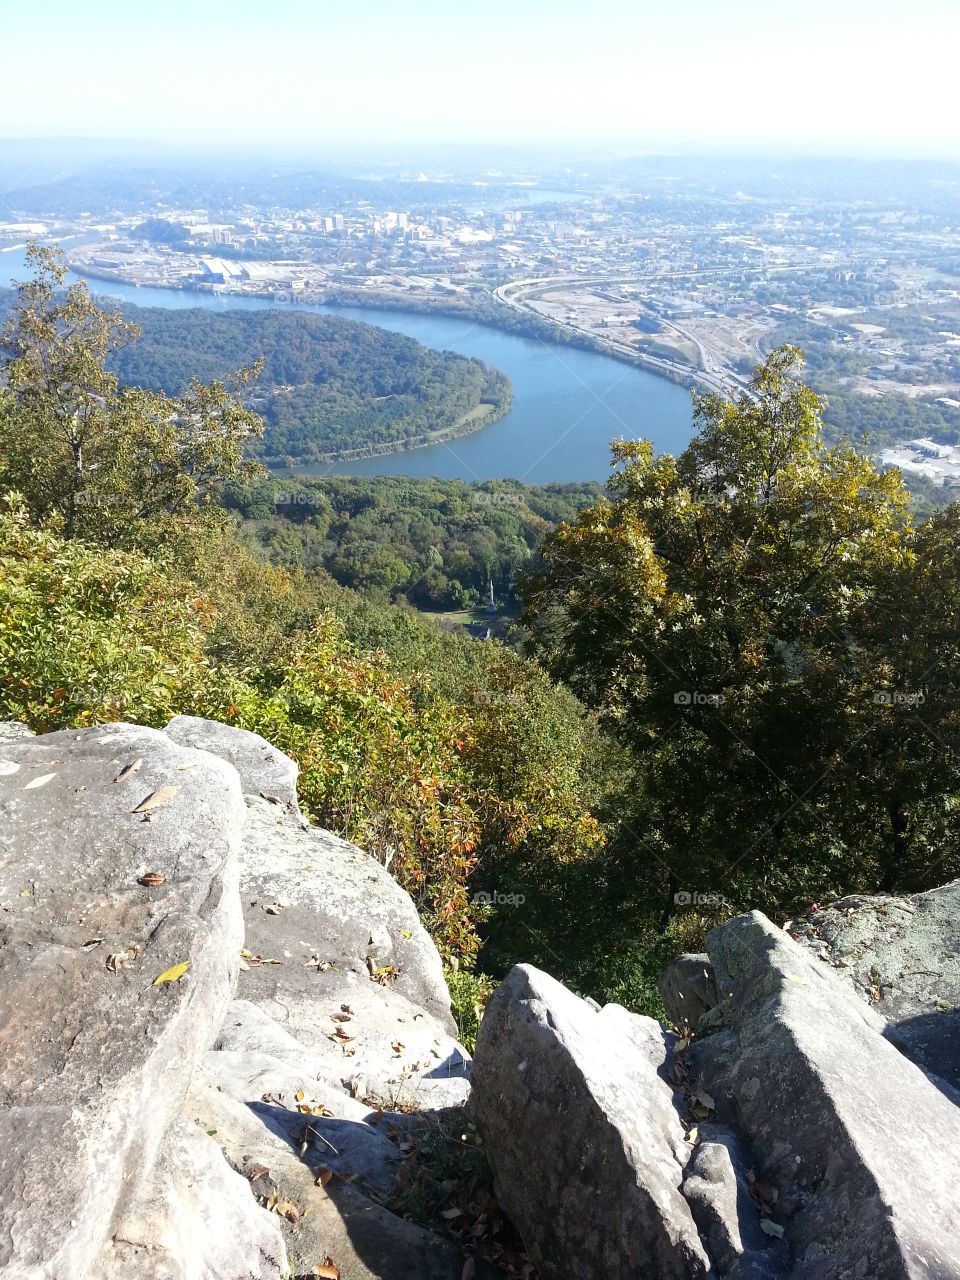 Scenic Overlook of Chattanooga Tennessee and River